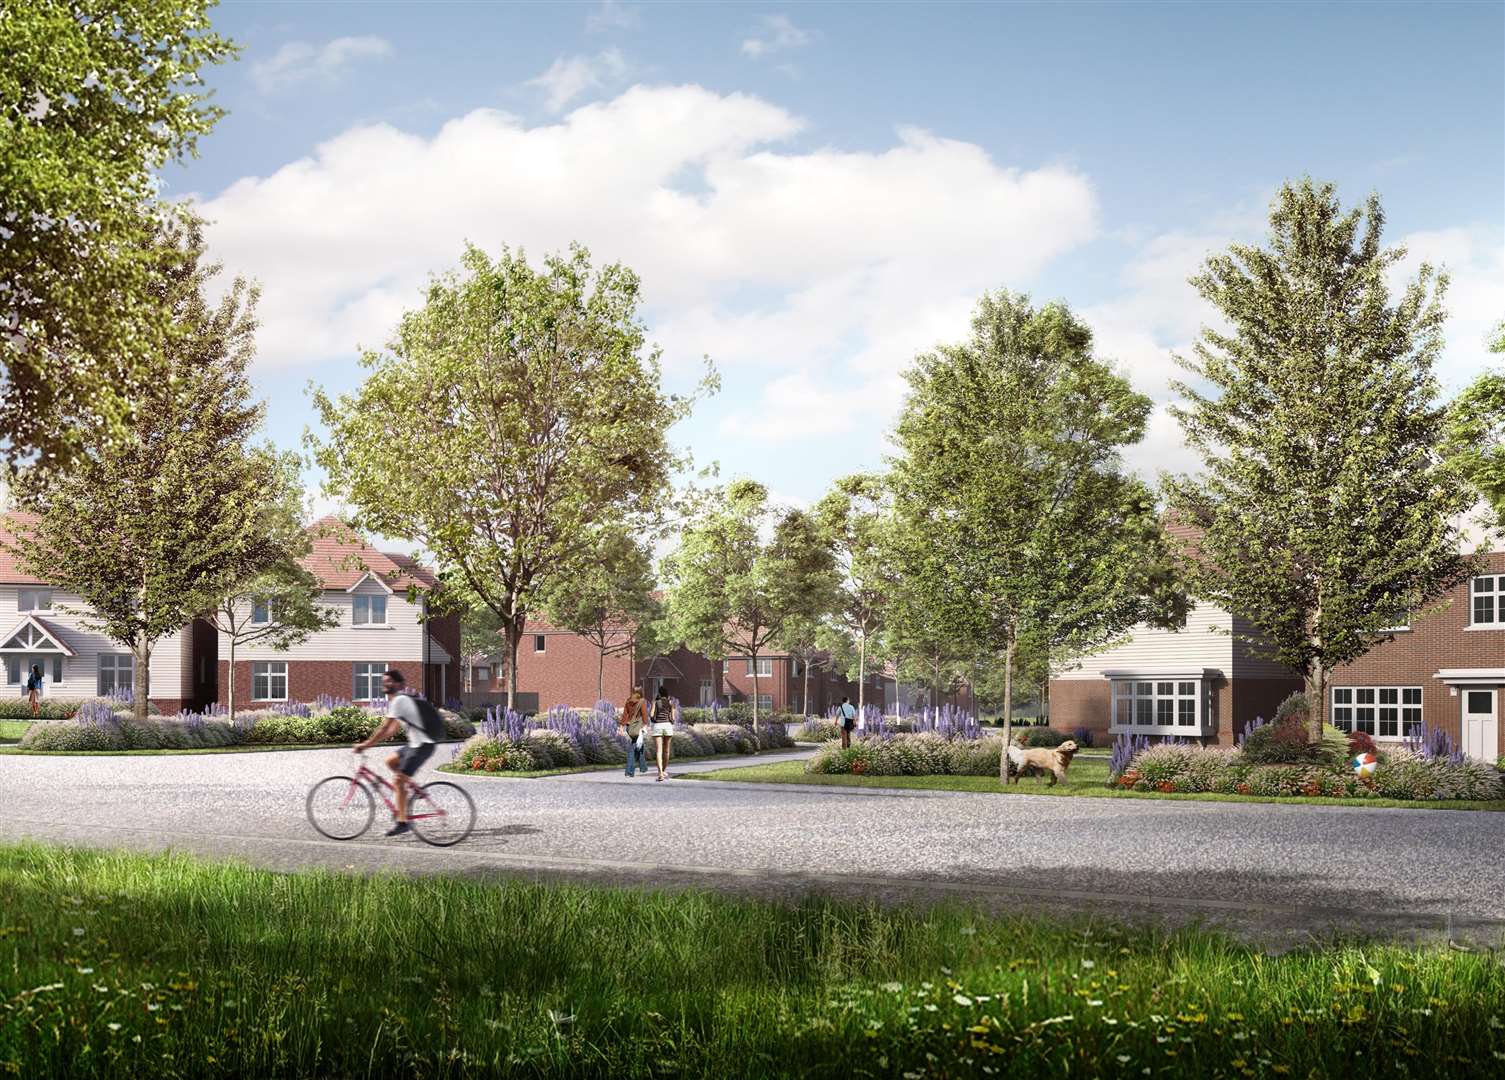 What the so-called Large Burton estate, officially known as Conningbrook Park, will look like if plans are approved